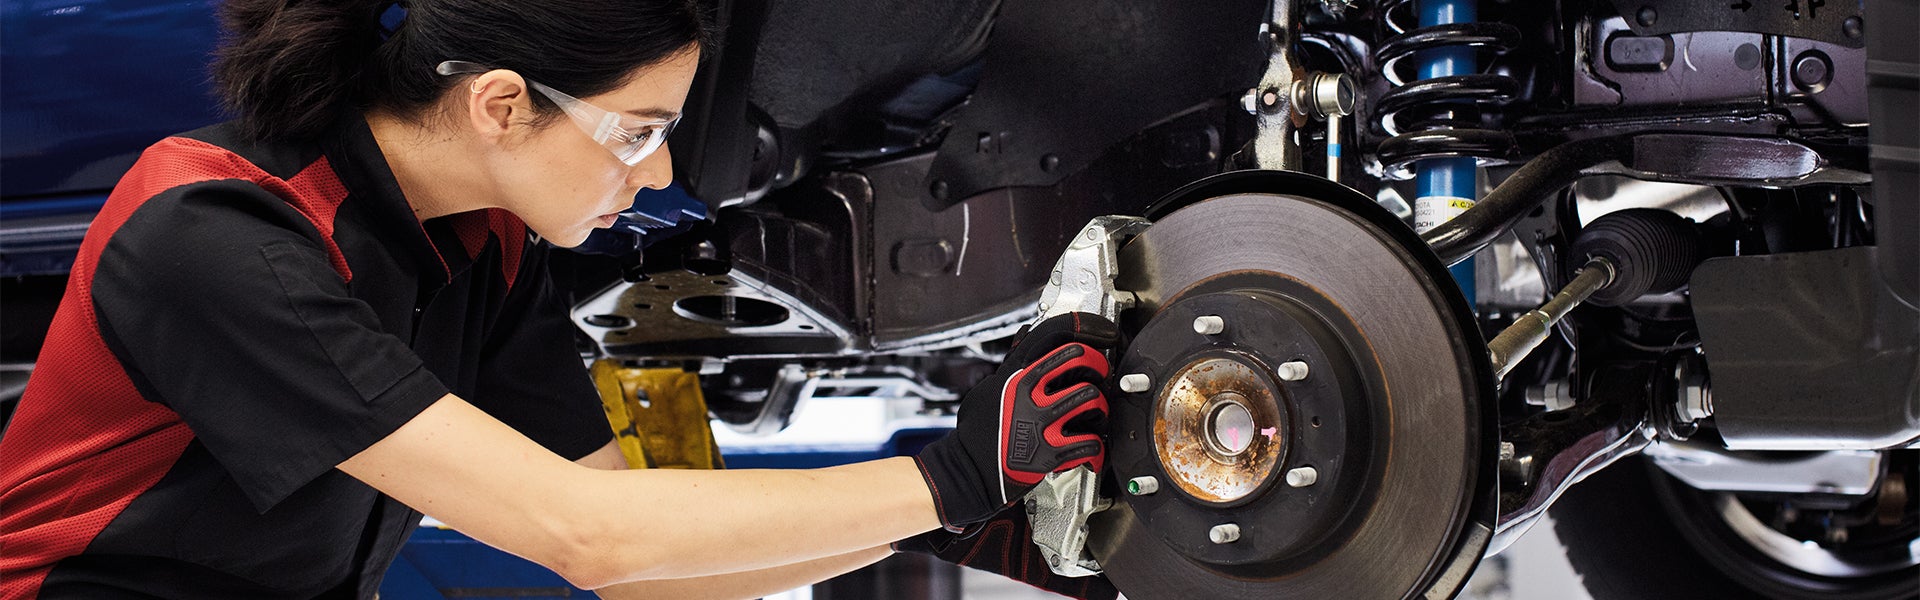 Bennett Toyota of Allentown is a Car Dealership near Reading, PA | Toyota mechanic fixing brakes on a Tacoma